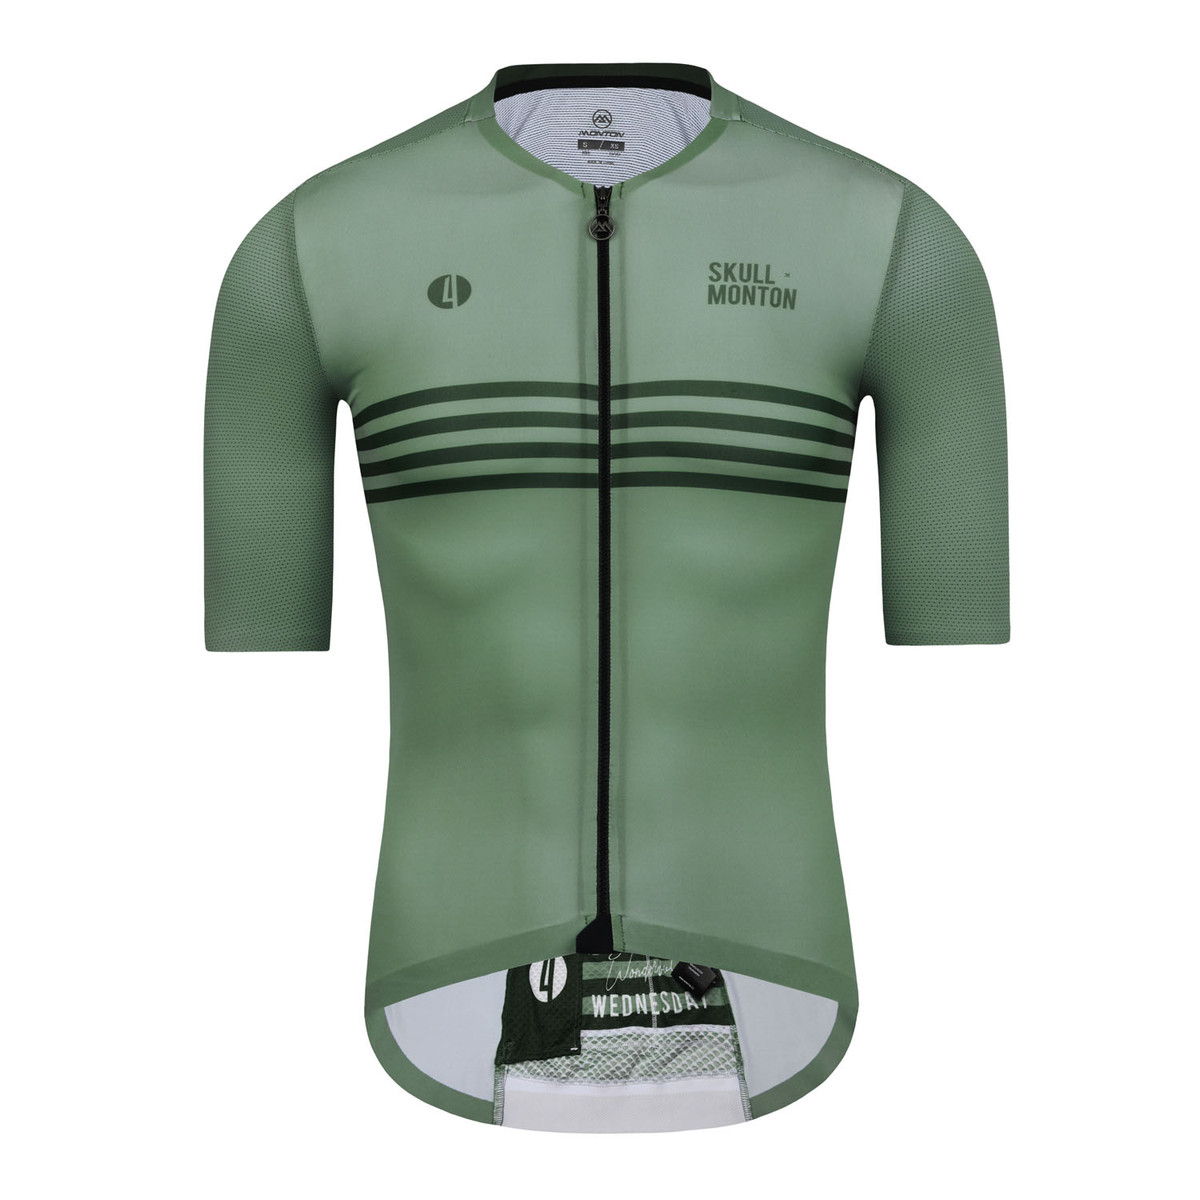 grey and green jersey